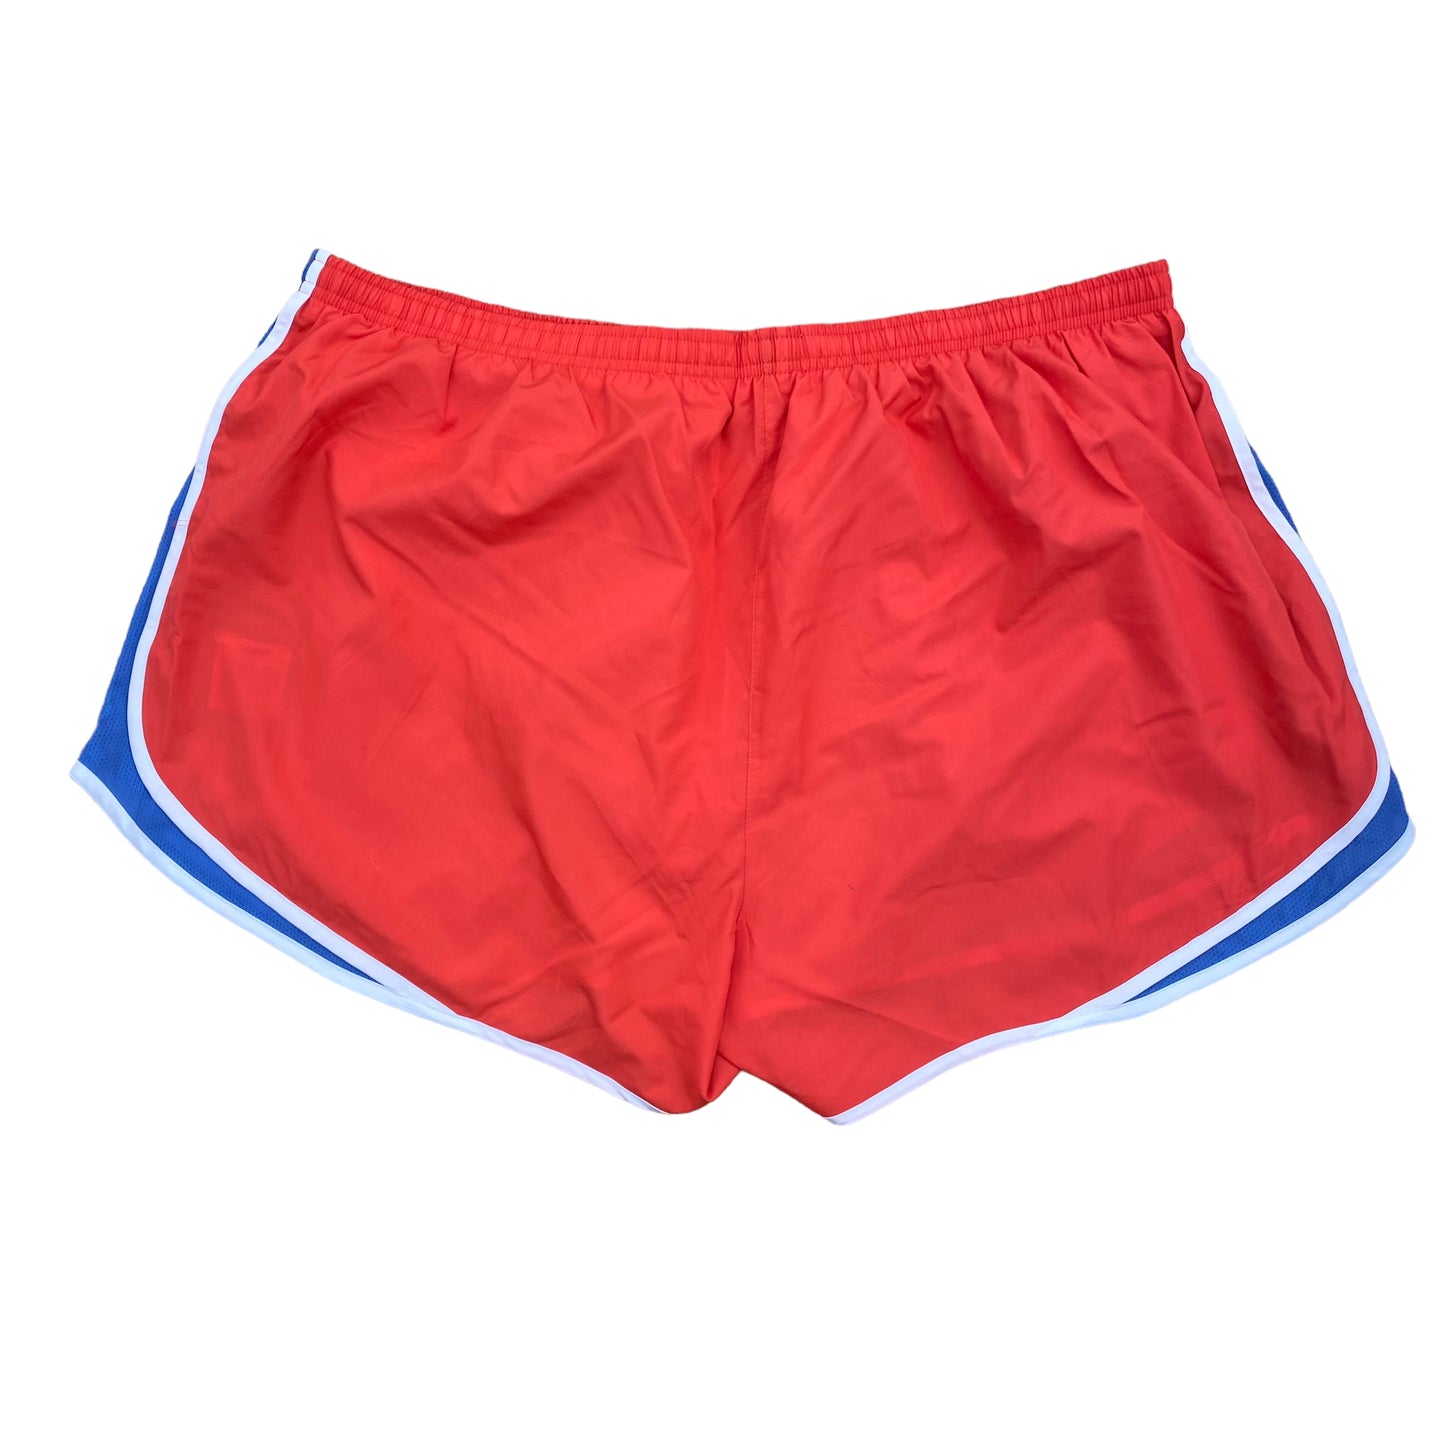 Athletic Shorts By Nike Apparel  Size: 3x